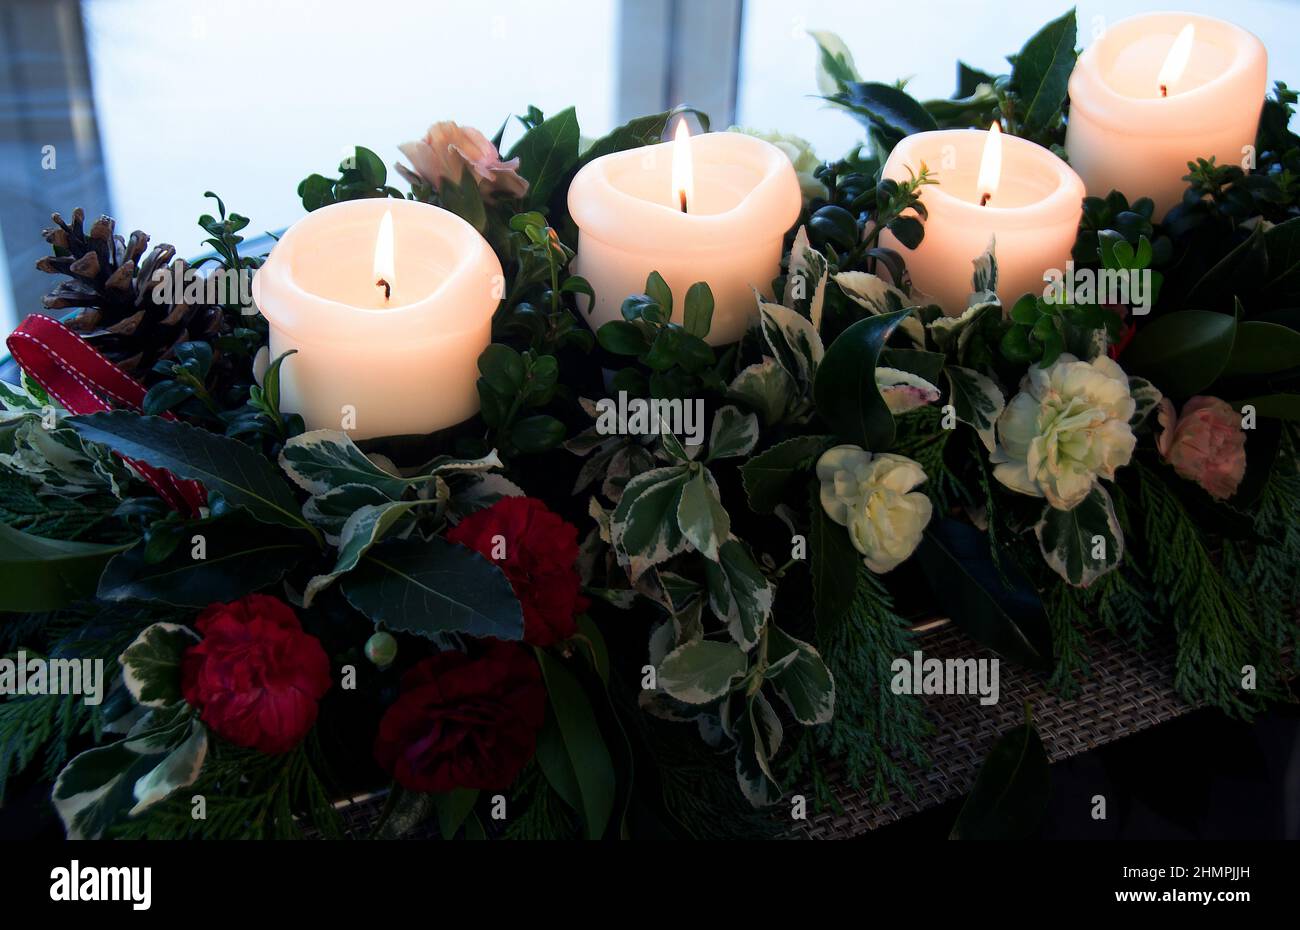 Advent wreath with lit candles Stock Photo